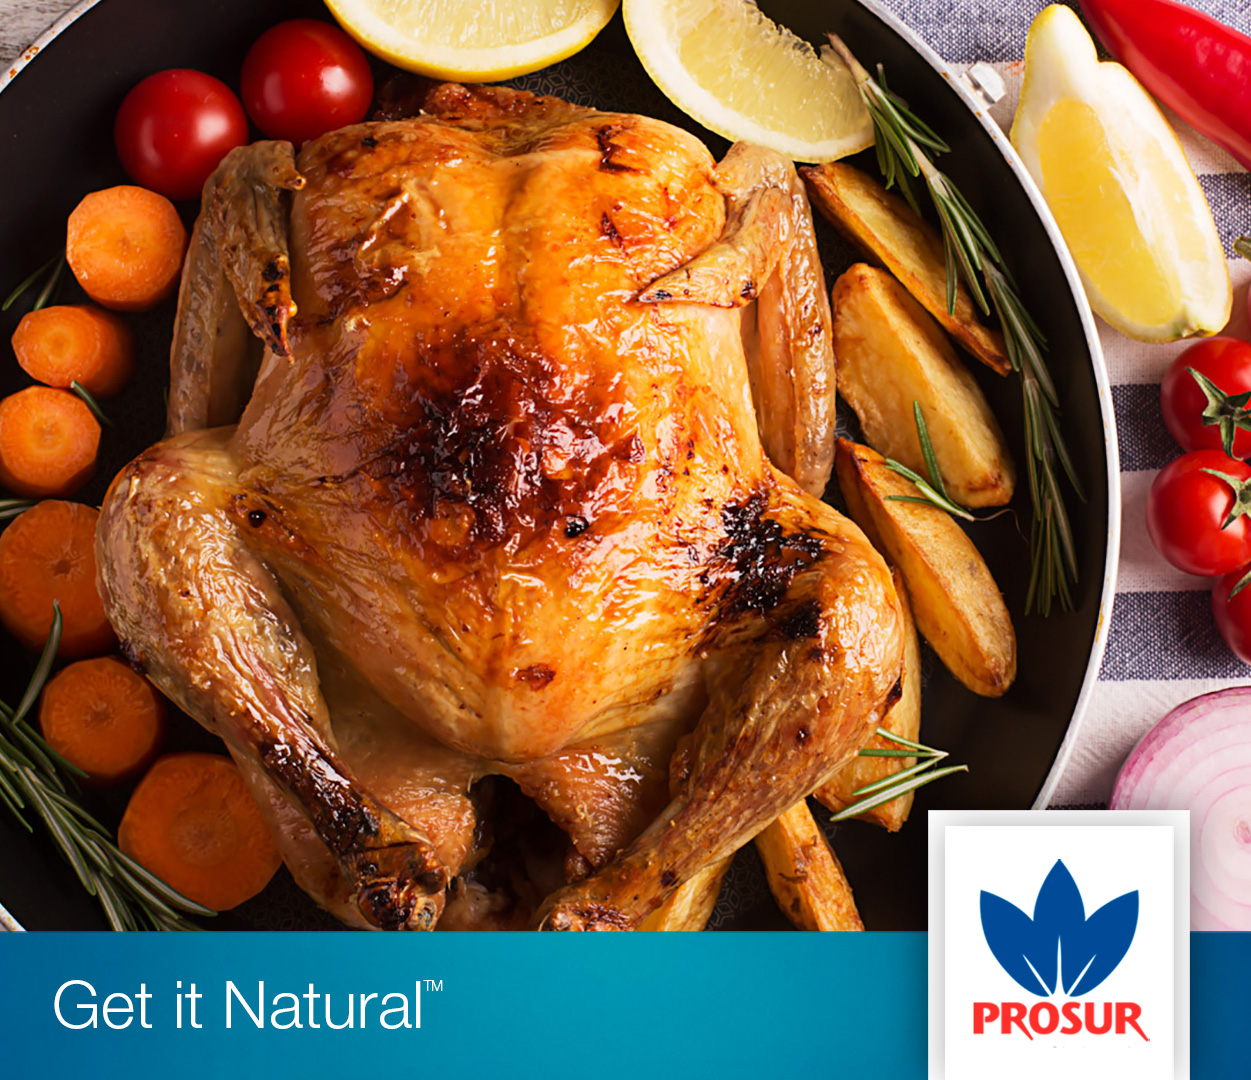 T-4: Natural Protection for Cooked Meat, Poultry & Plant-based Alternatives, Prosur, Inc.